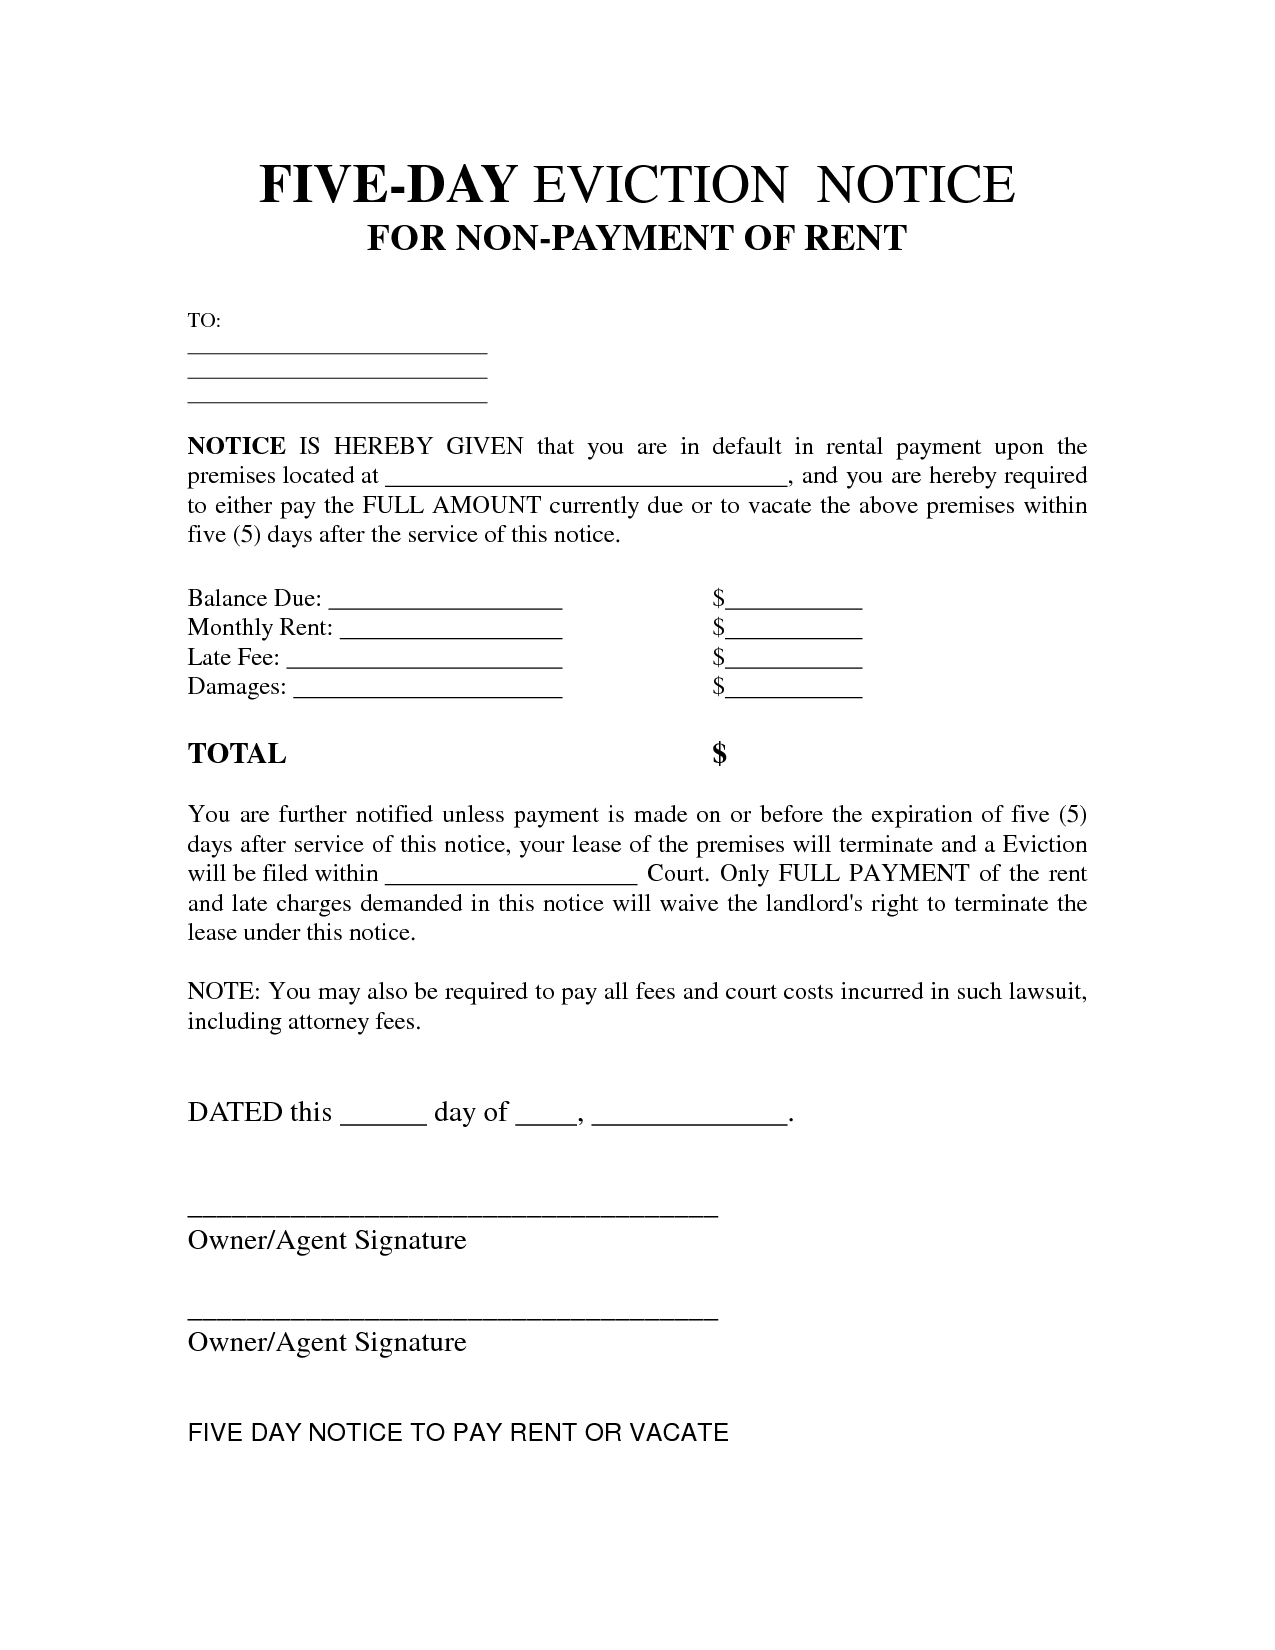 5 Day Eviction Notice - Free Printable Documents